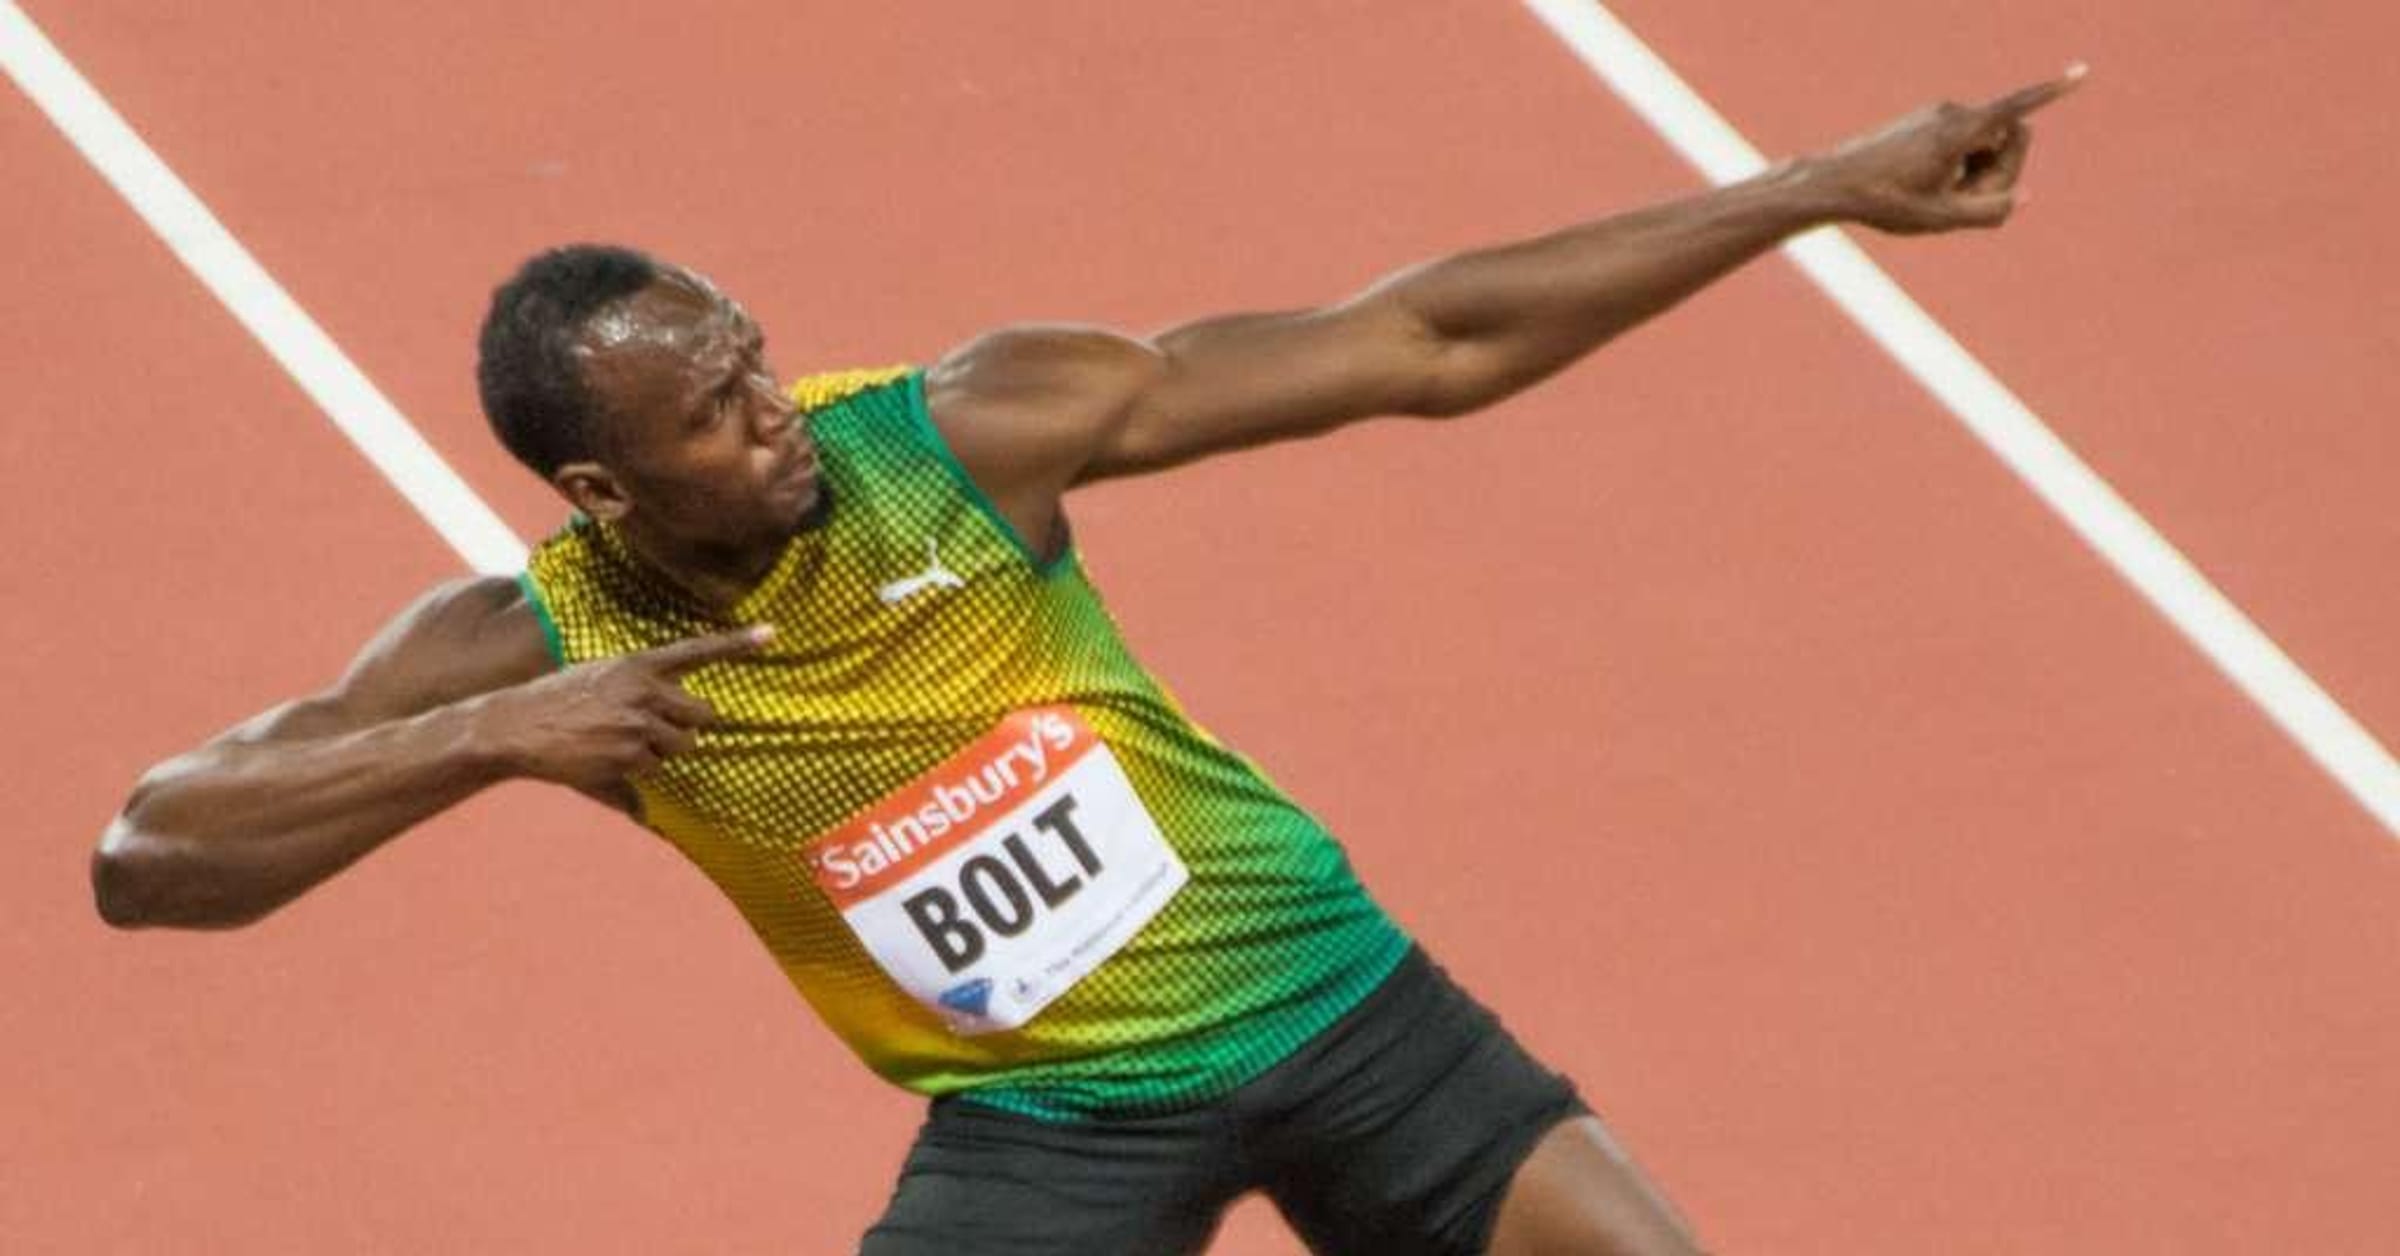 Top 10 Jamaican track and field athletic stars